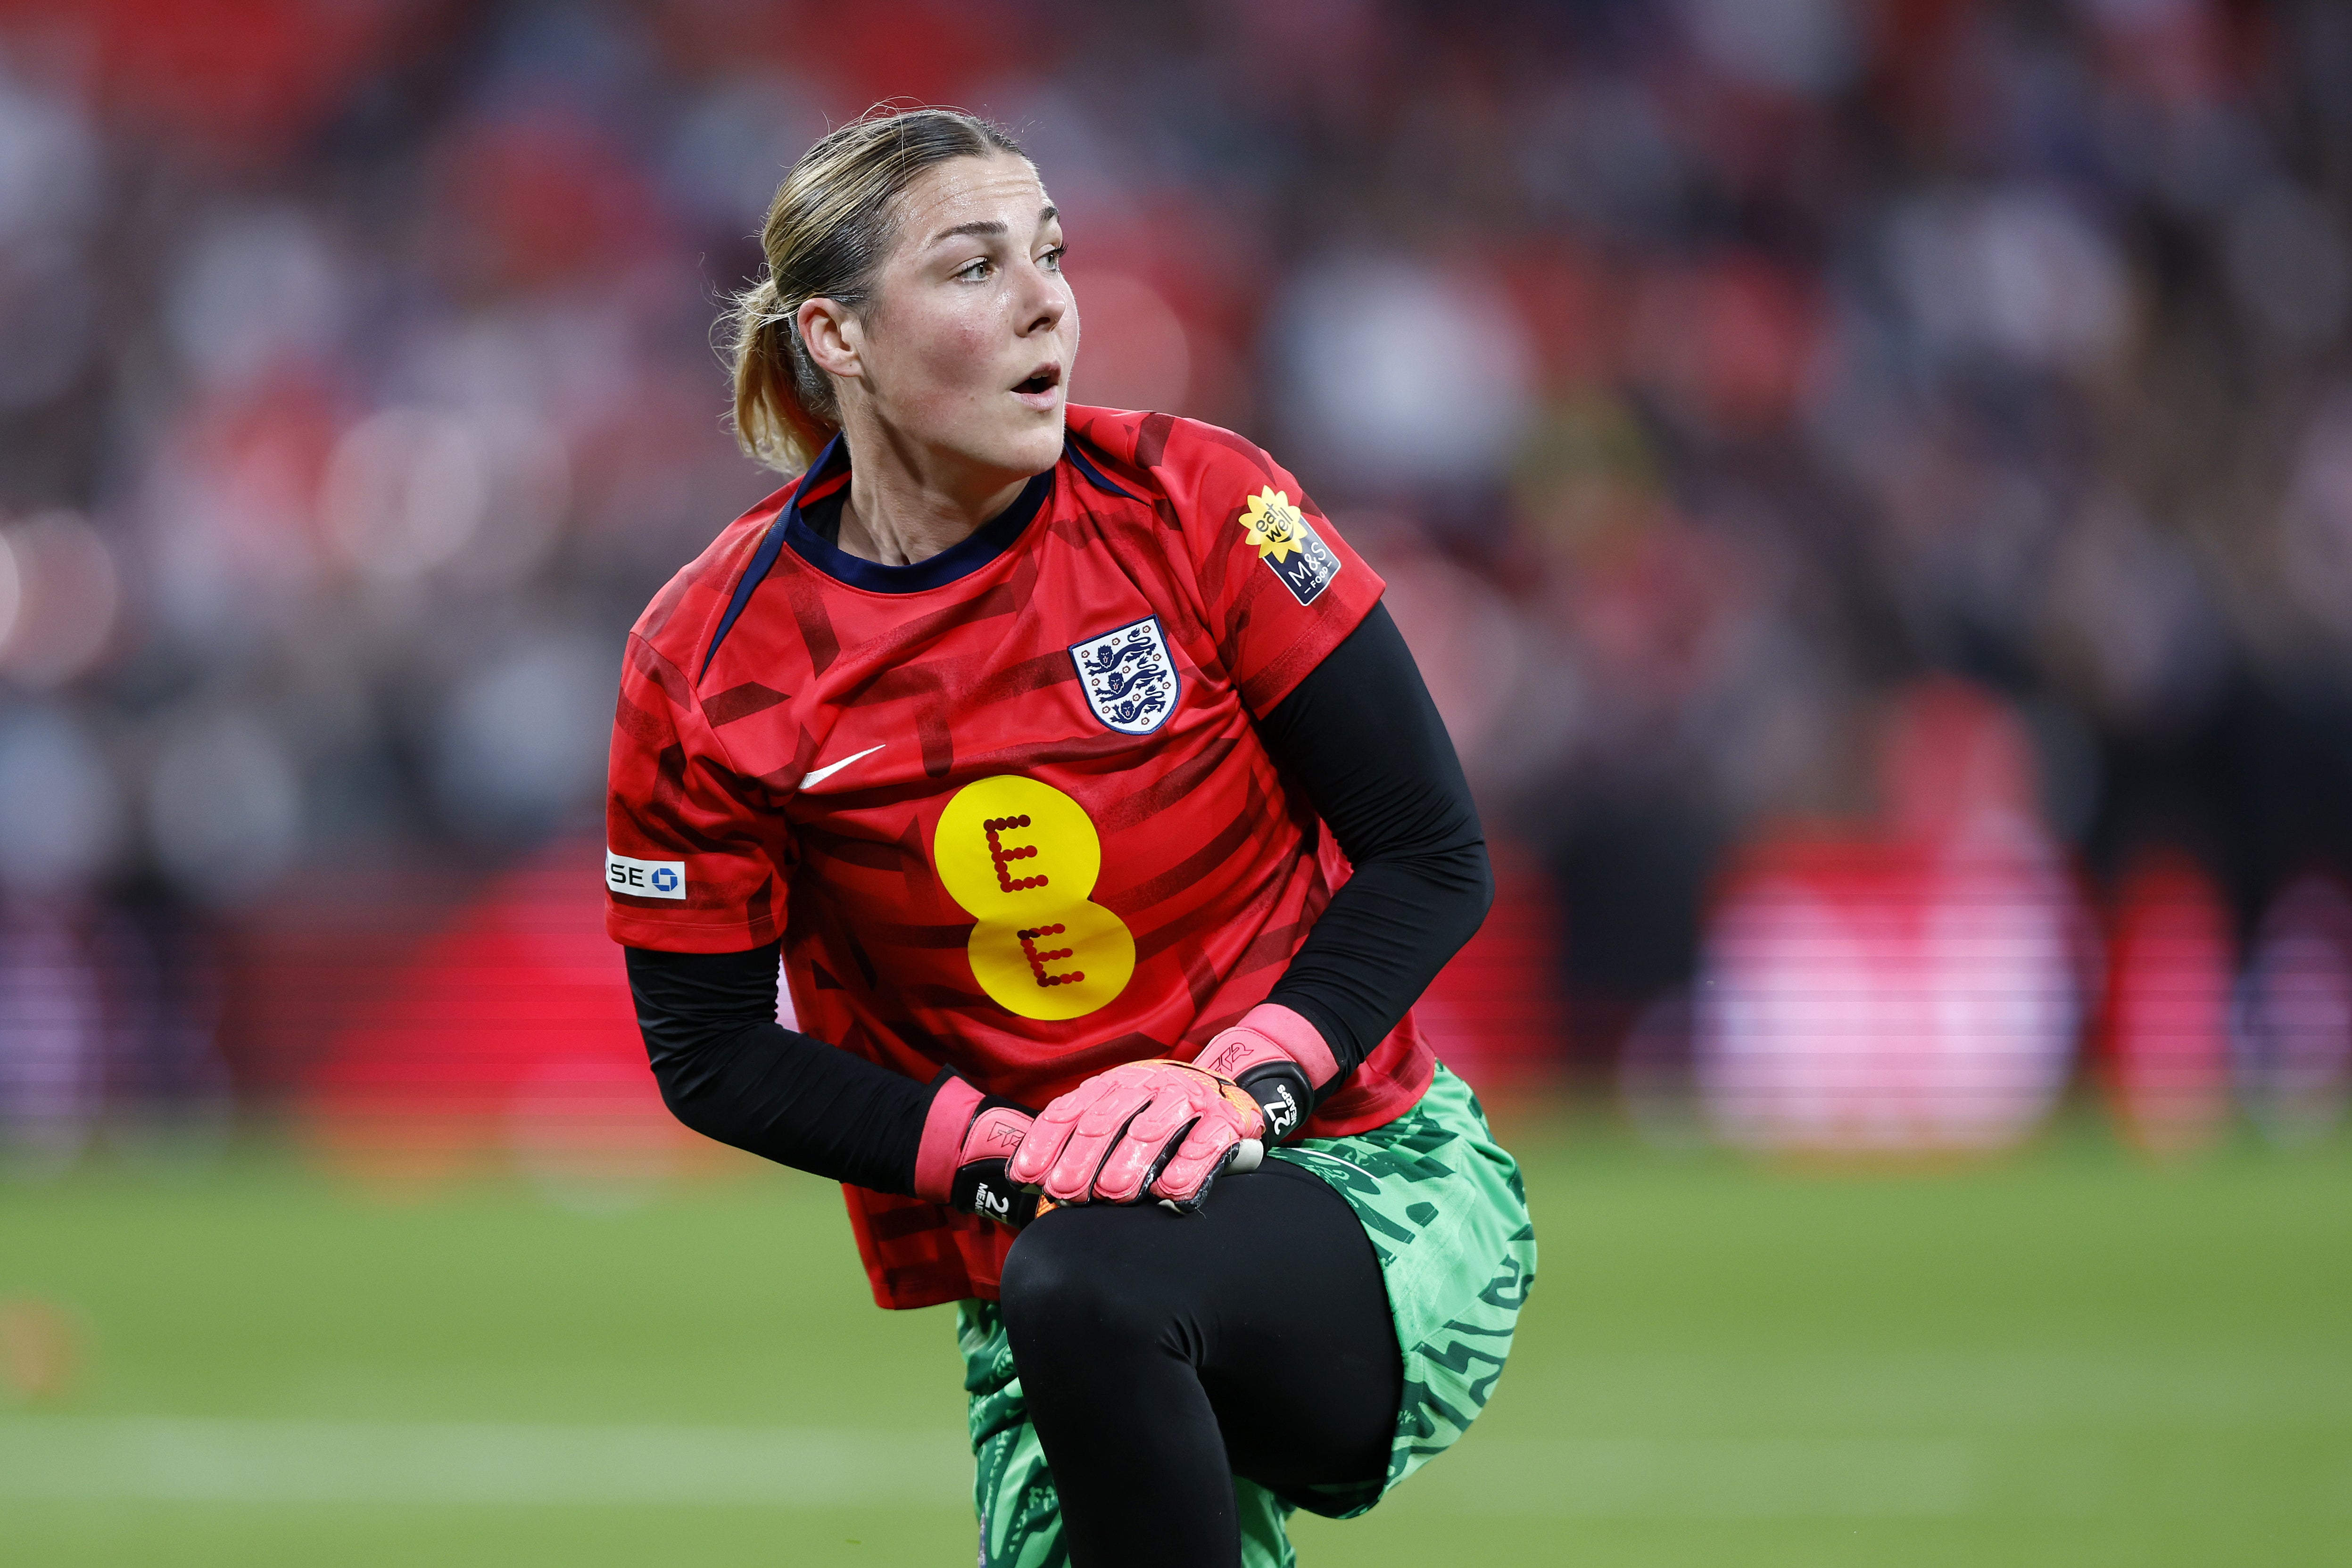 England goalkeeper Mary Earps is fit again for international duty after injury (Nigel French/PA)